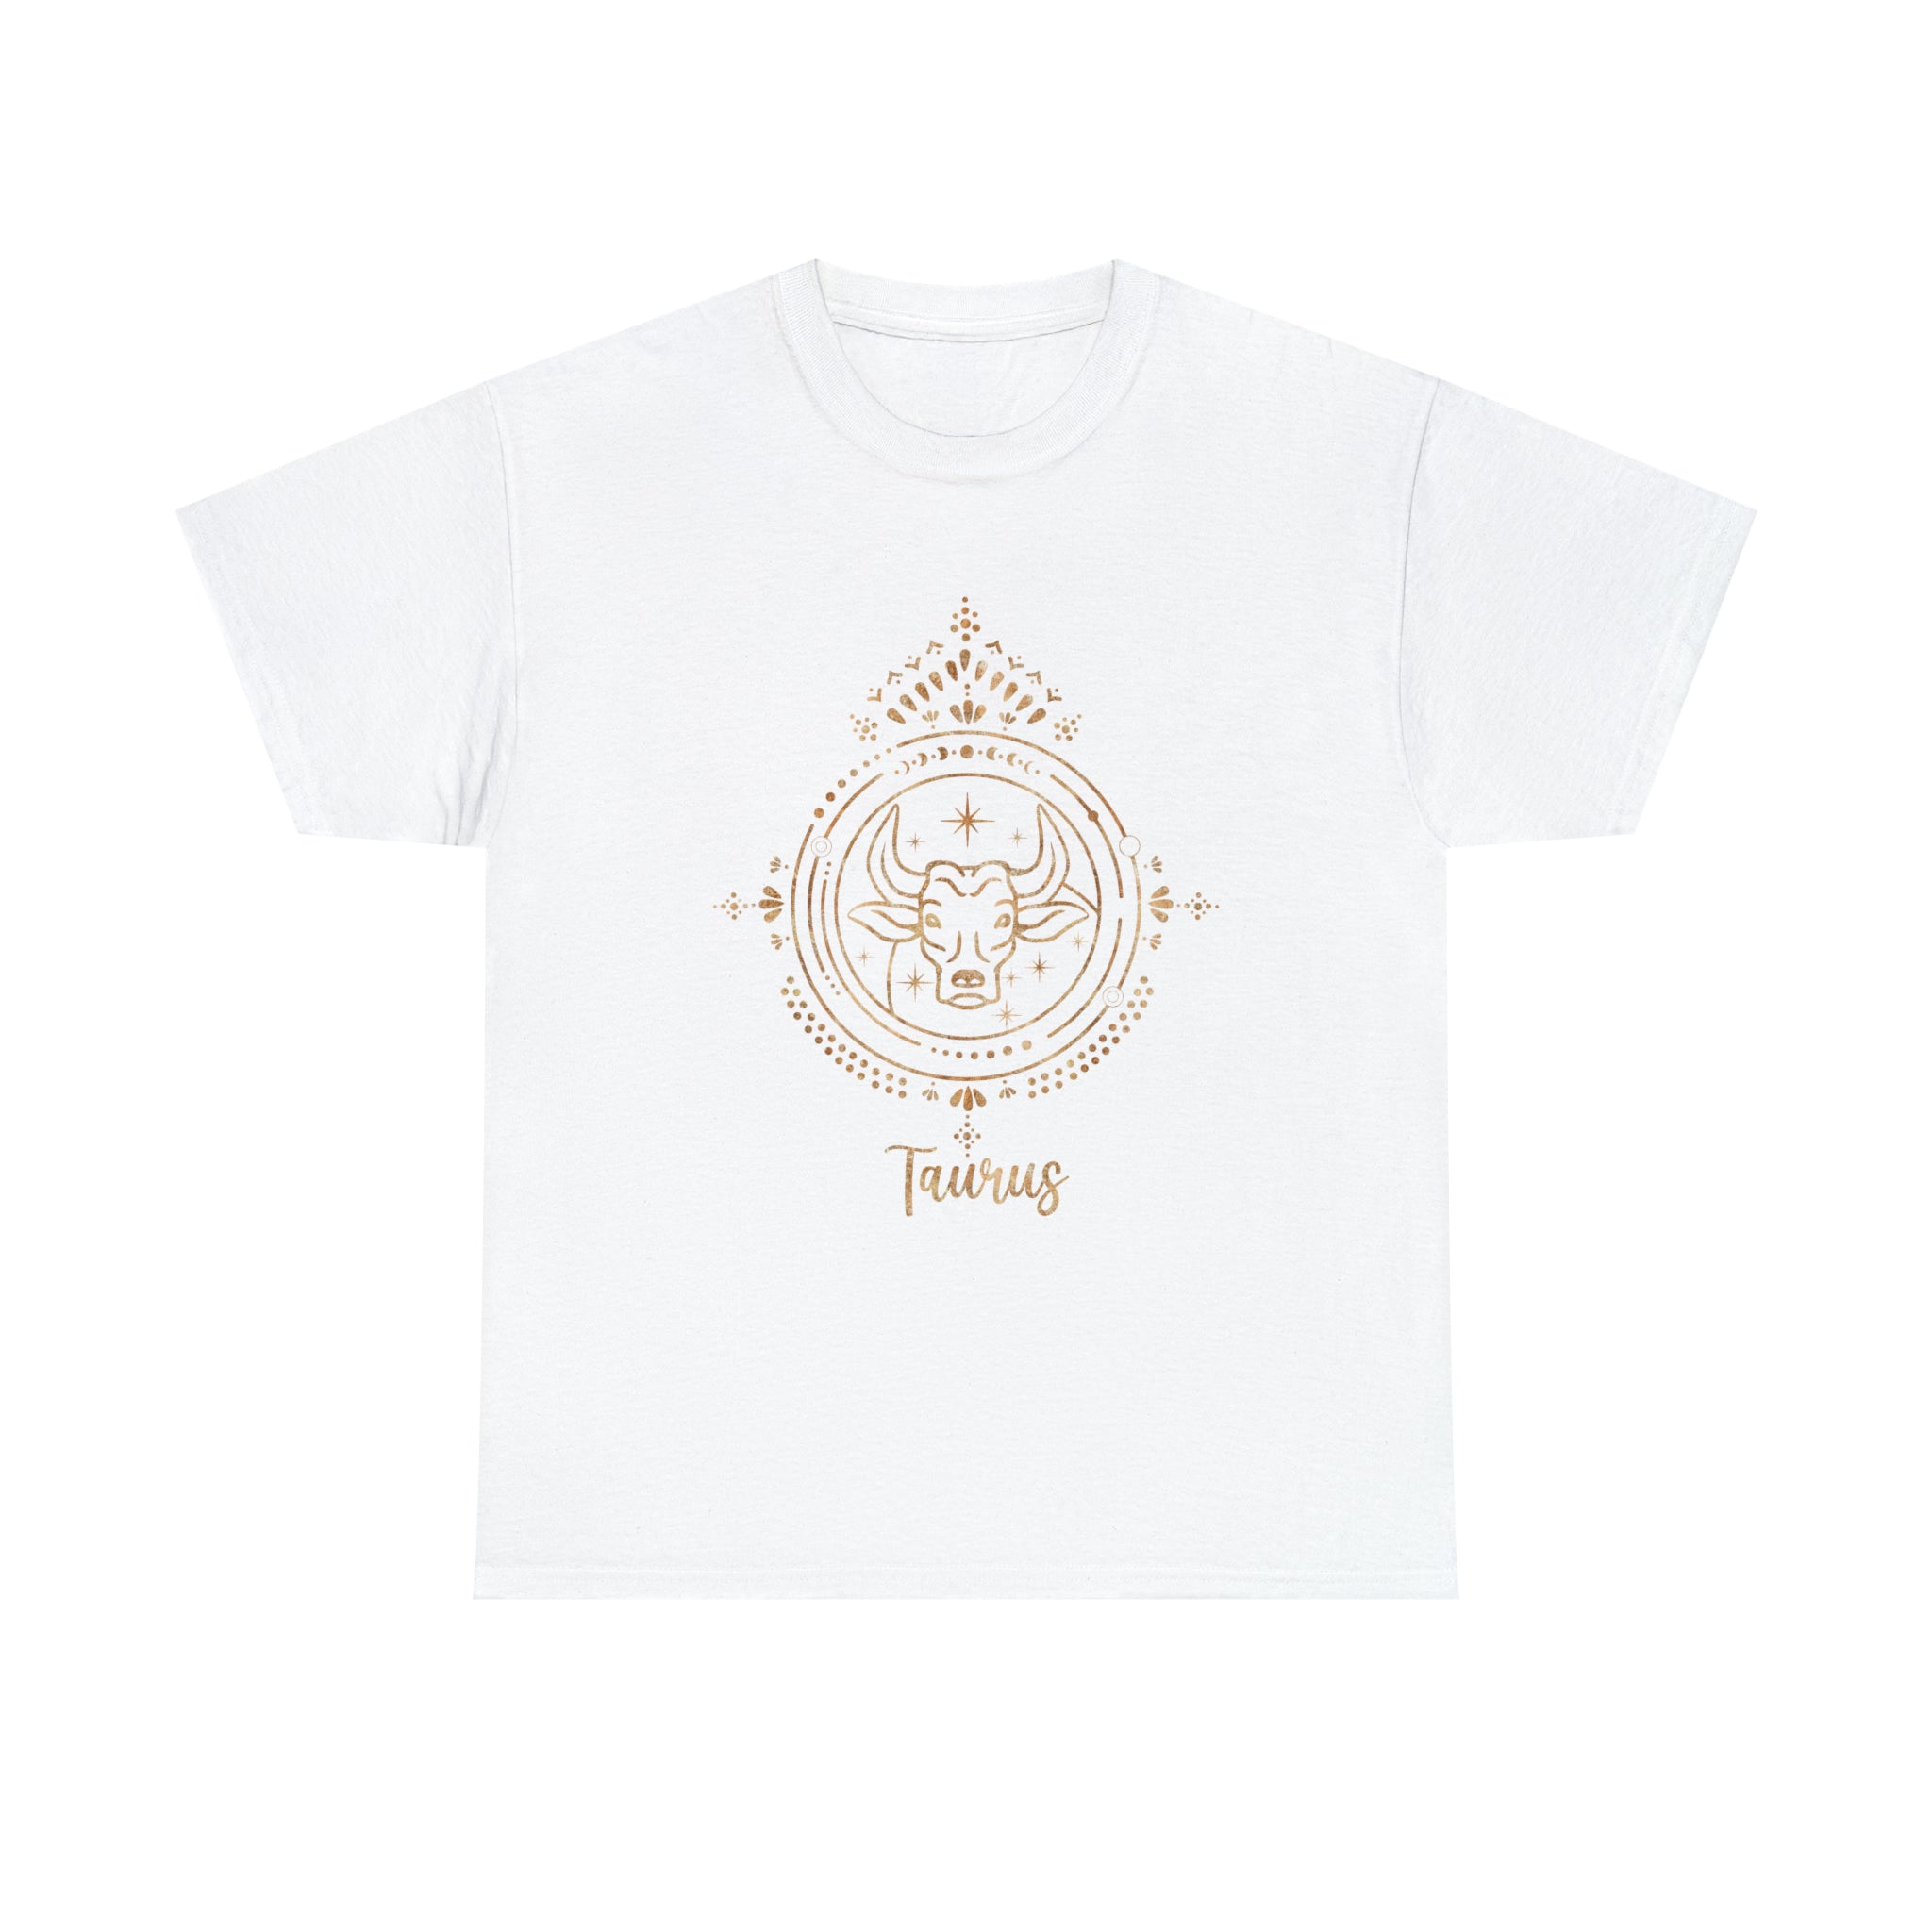 A Tauruses T-Shirt with an image of a tiger, representing the pleasure-seeking personality and steadfast nature of Taurus.